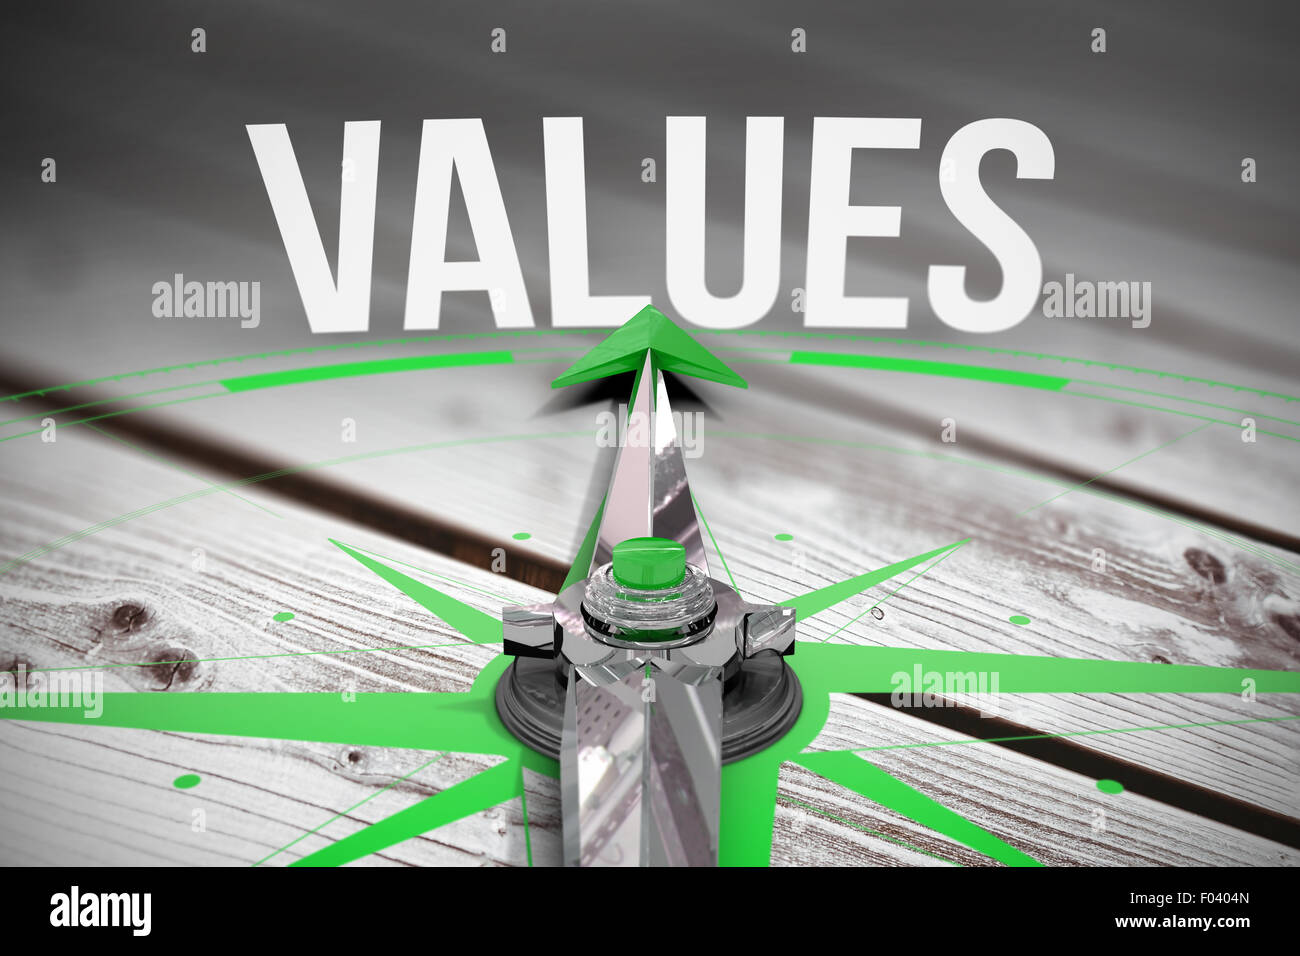 Values against digitally generated grey wooden planks Stock Photo